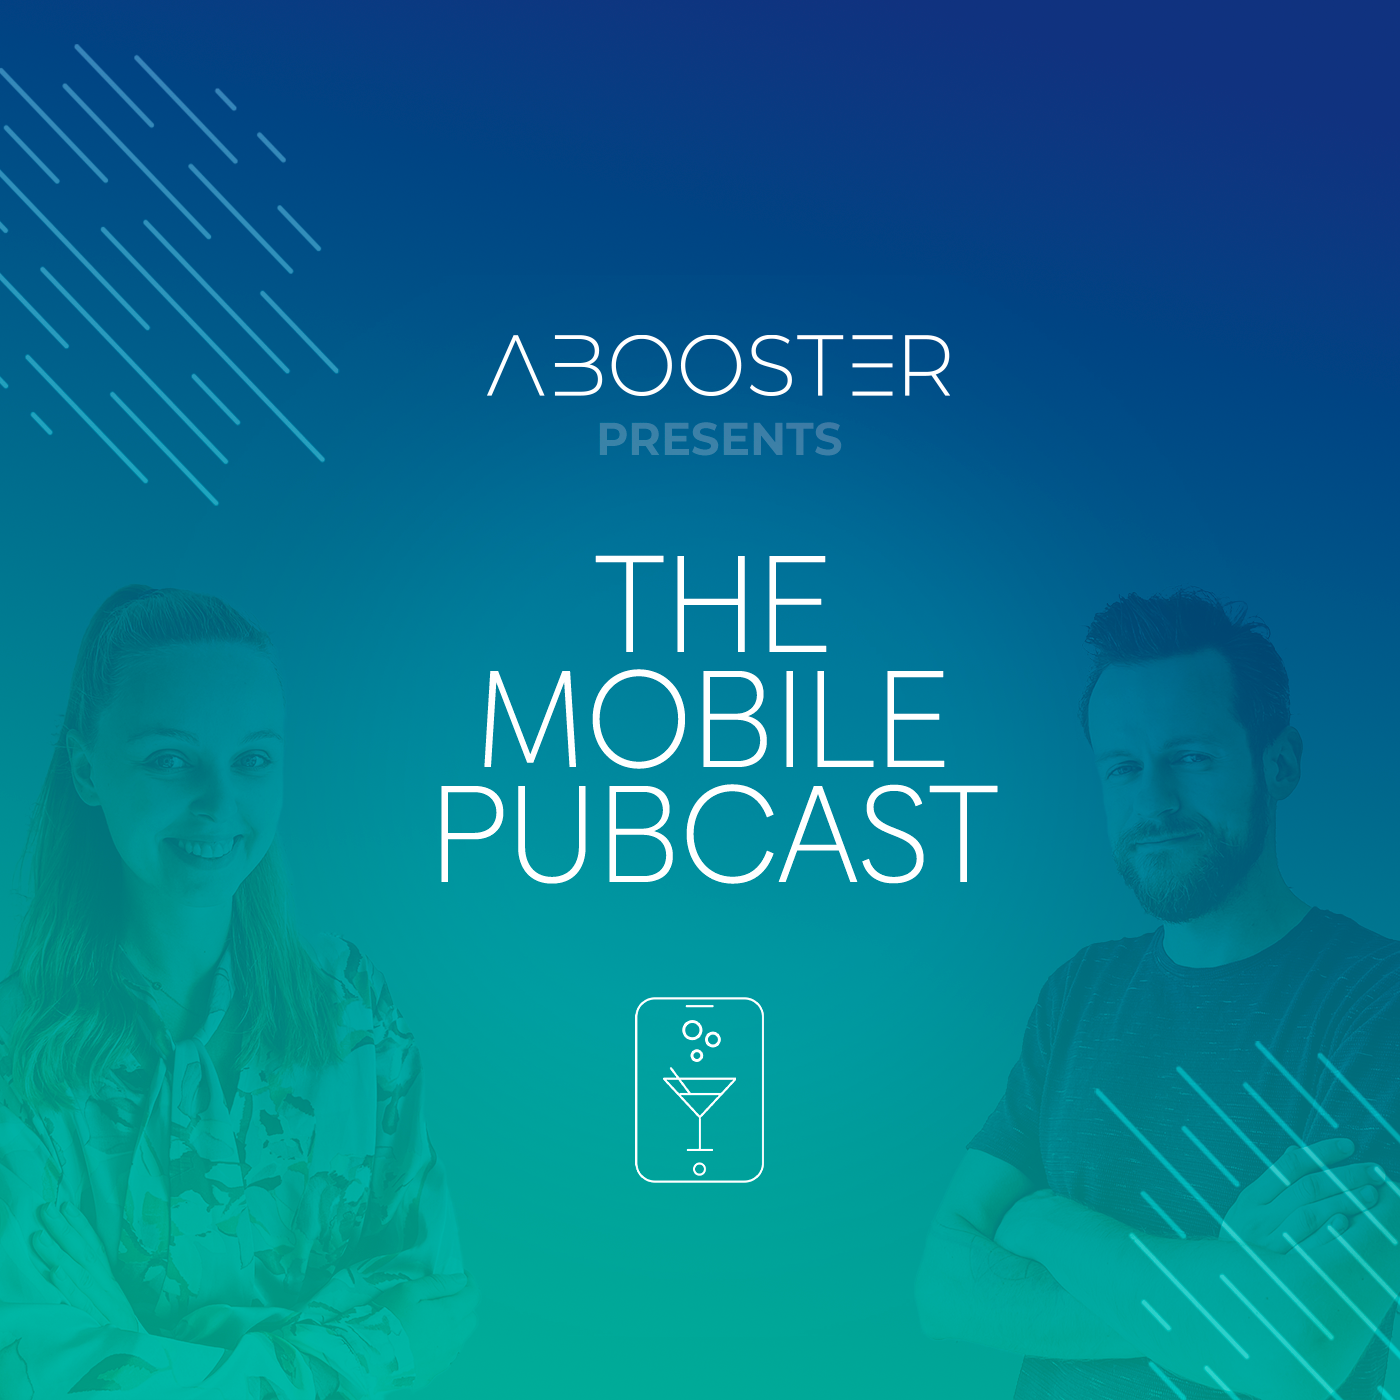 Introducing “The Mobile Pubcast” podcast. Cheers to App Marketing Insights! 🍻🎙️